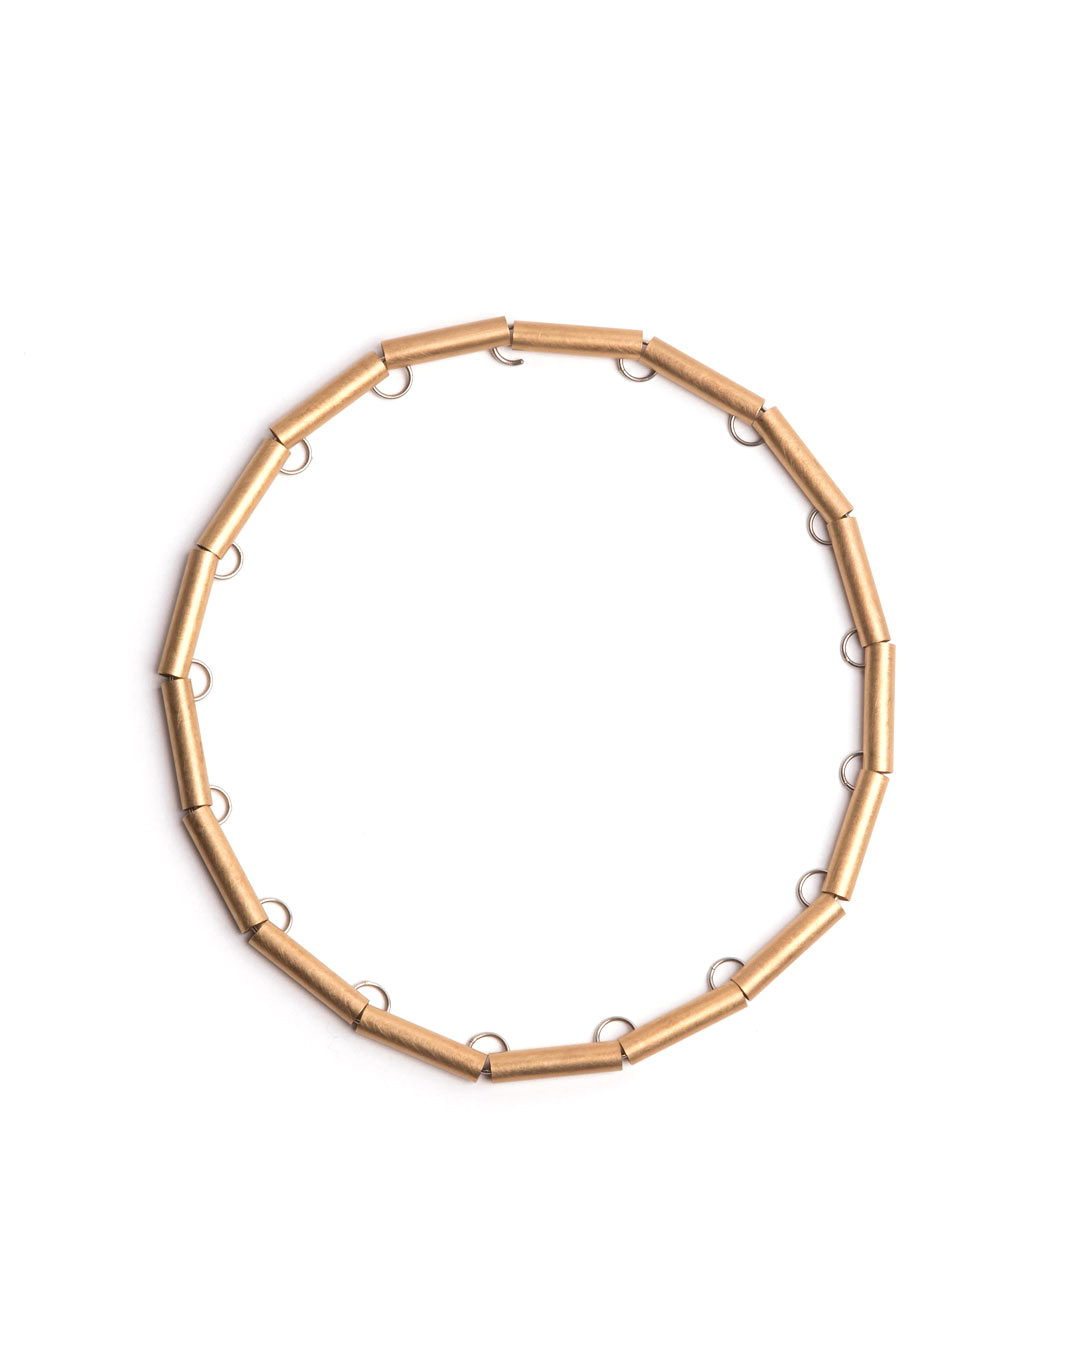 Herman Hermsen, Tube Chain, 1998, necklace; yellow gold, white gold, 435 x 8 x 6 mm, €7875